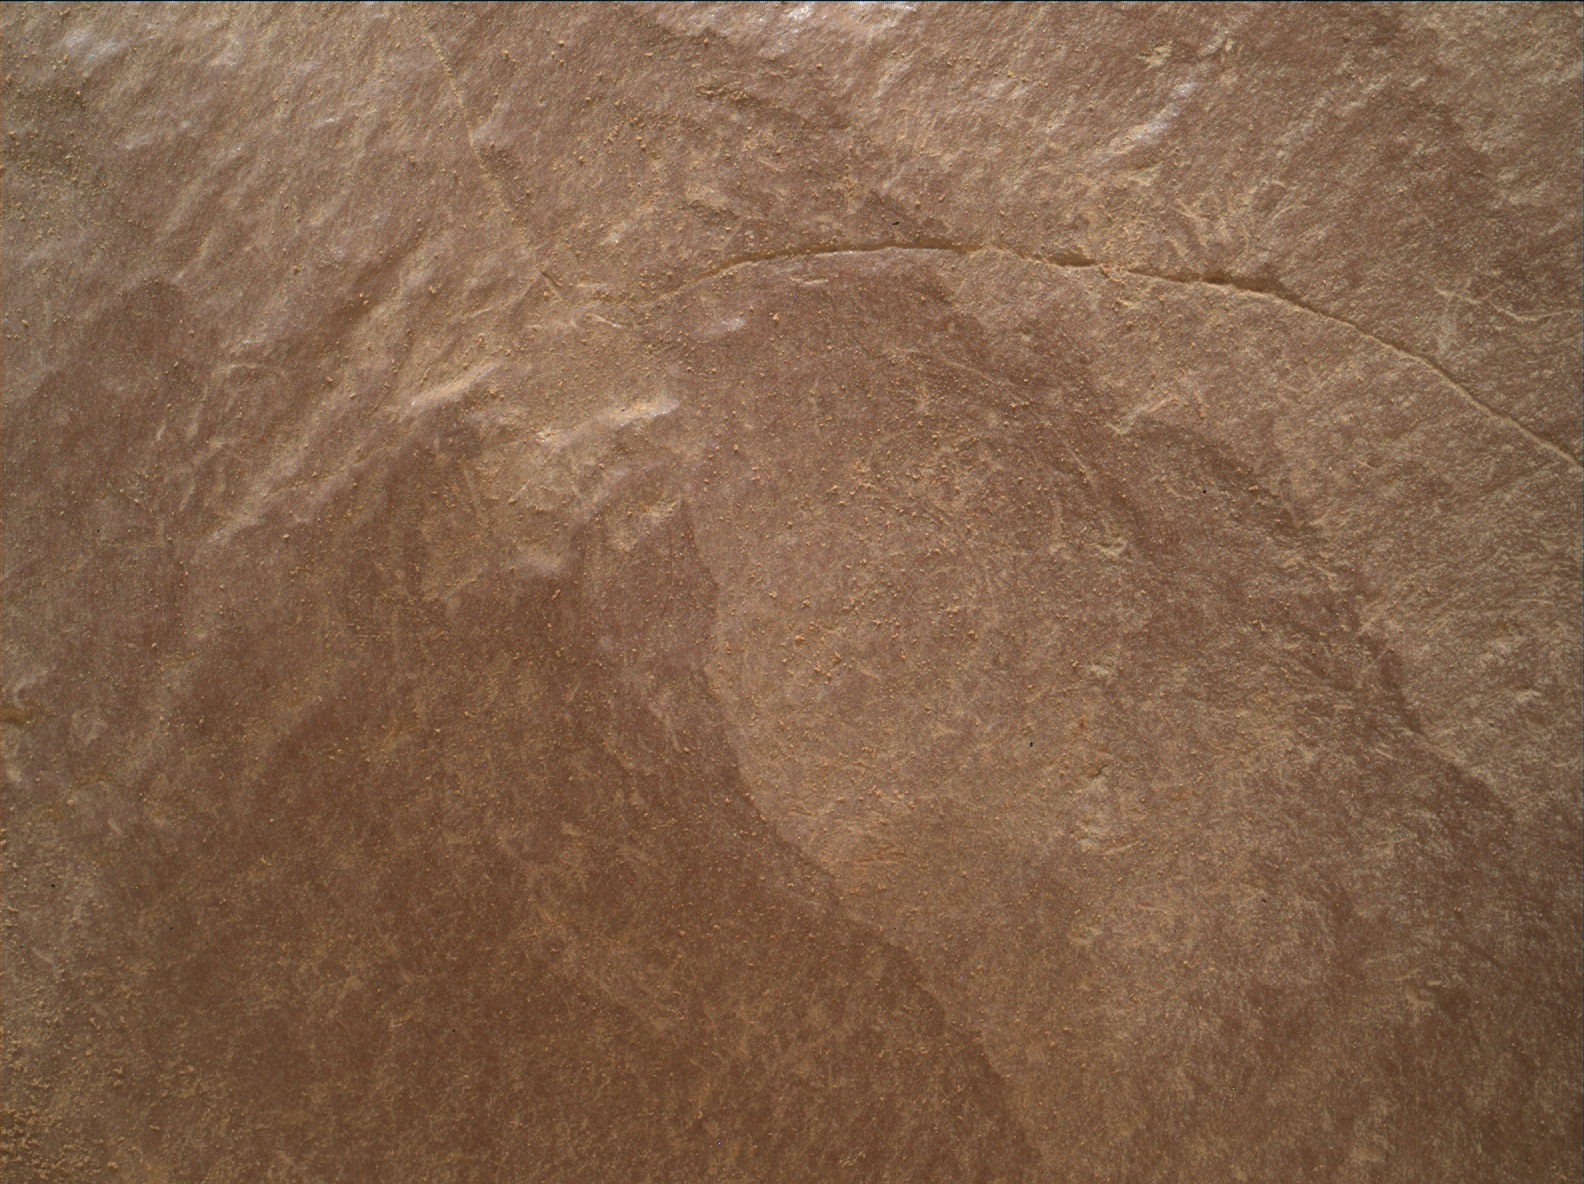 Nasa's Mars rover Curiosity acquired this image using its Mars Hand Lens Imager (MAHLI) on Sol 2302